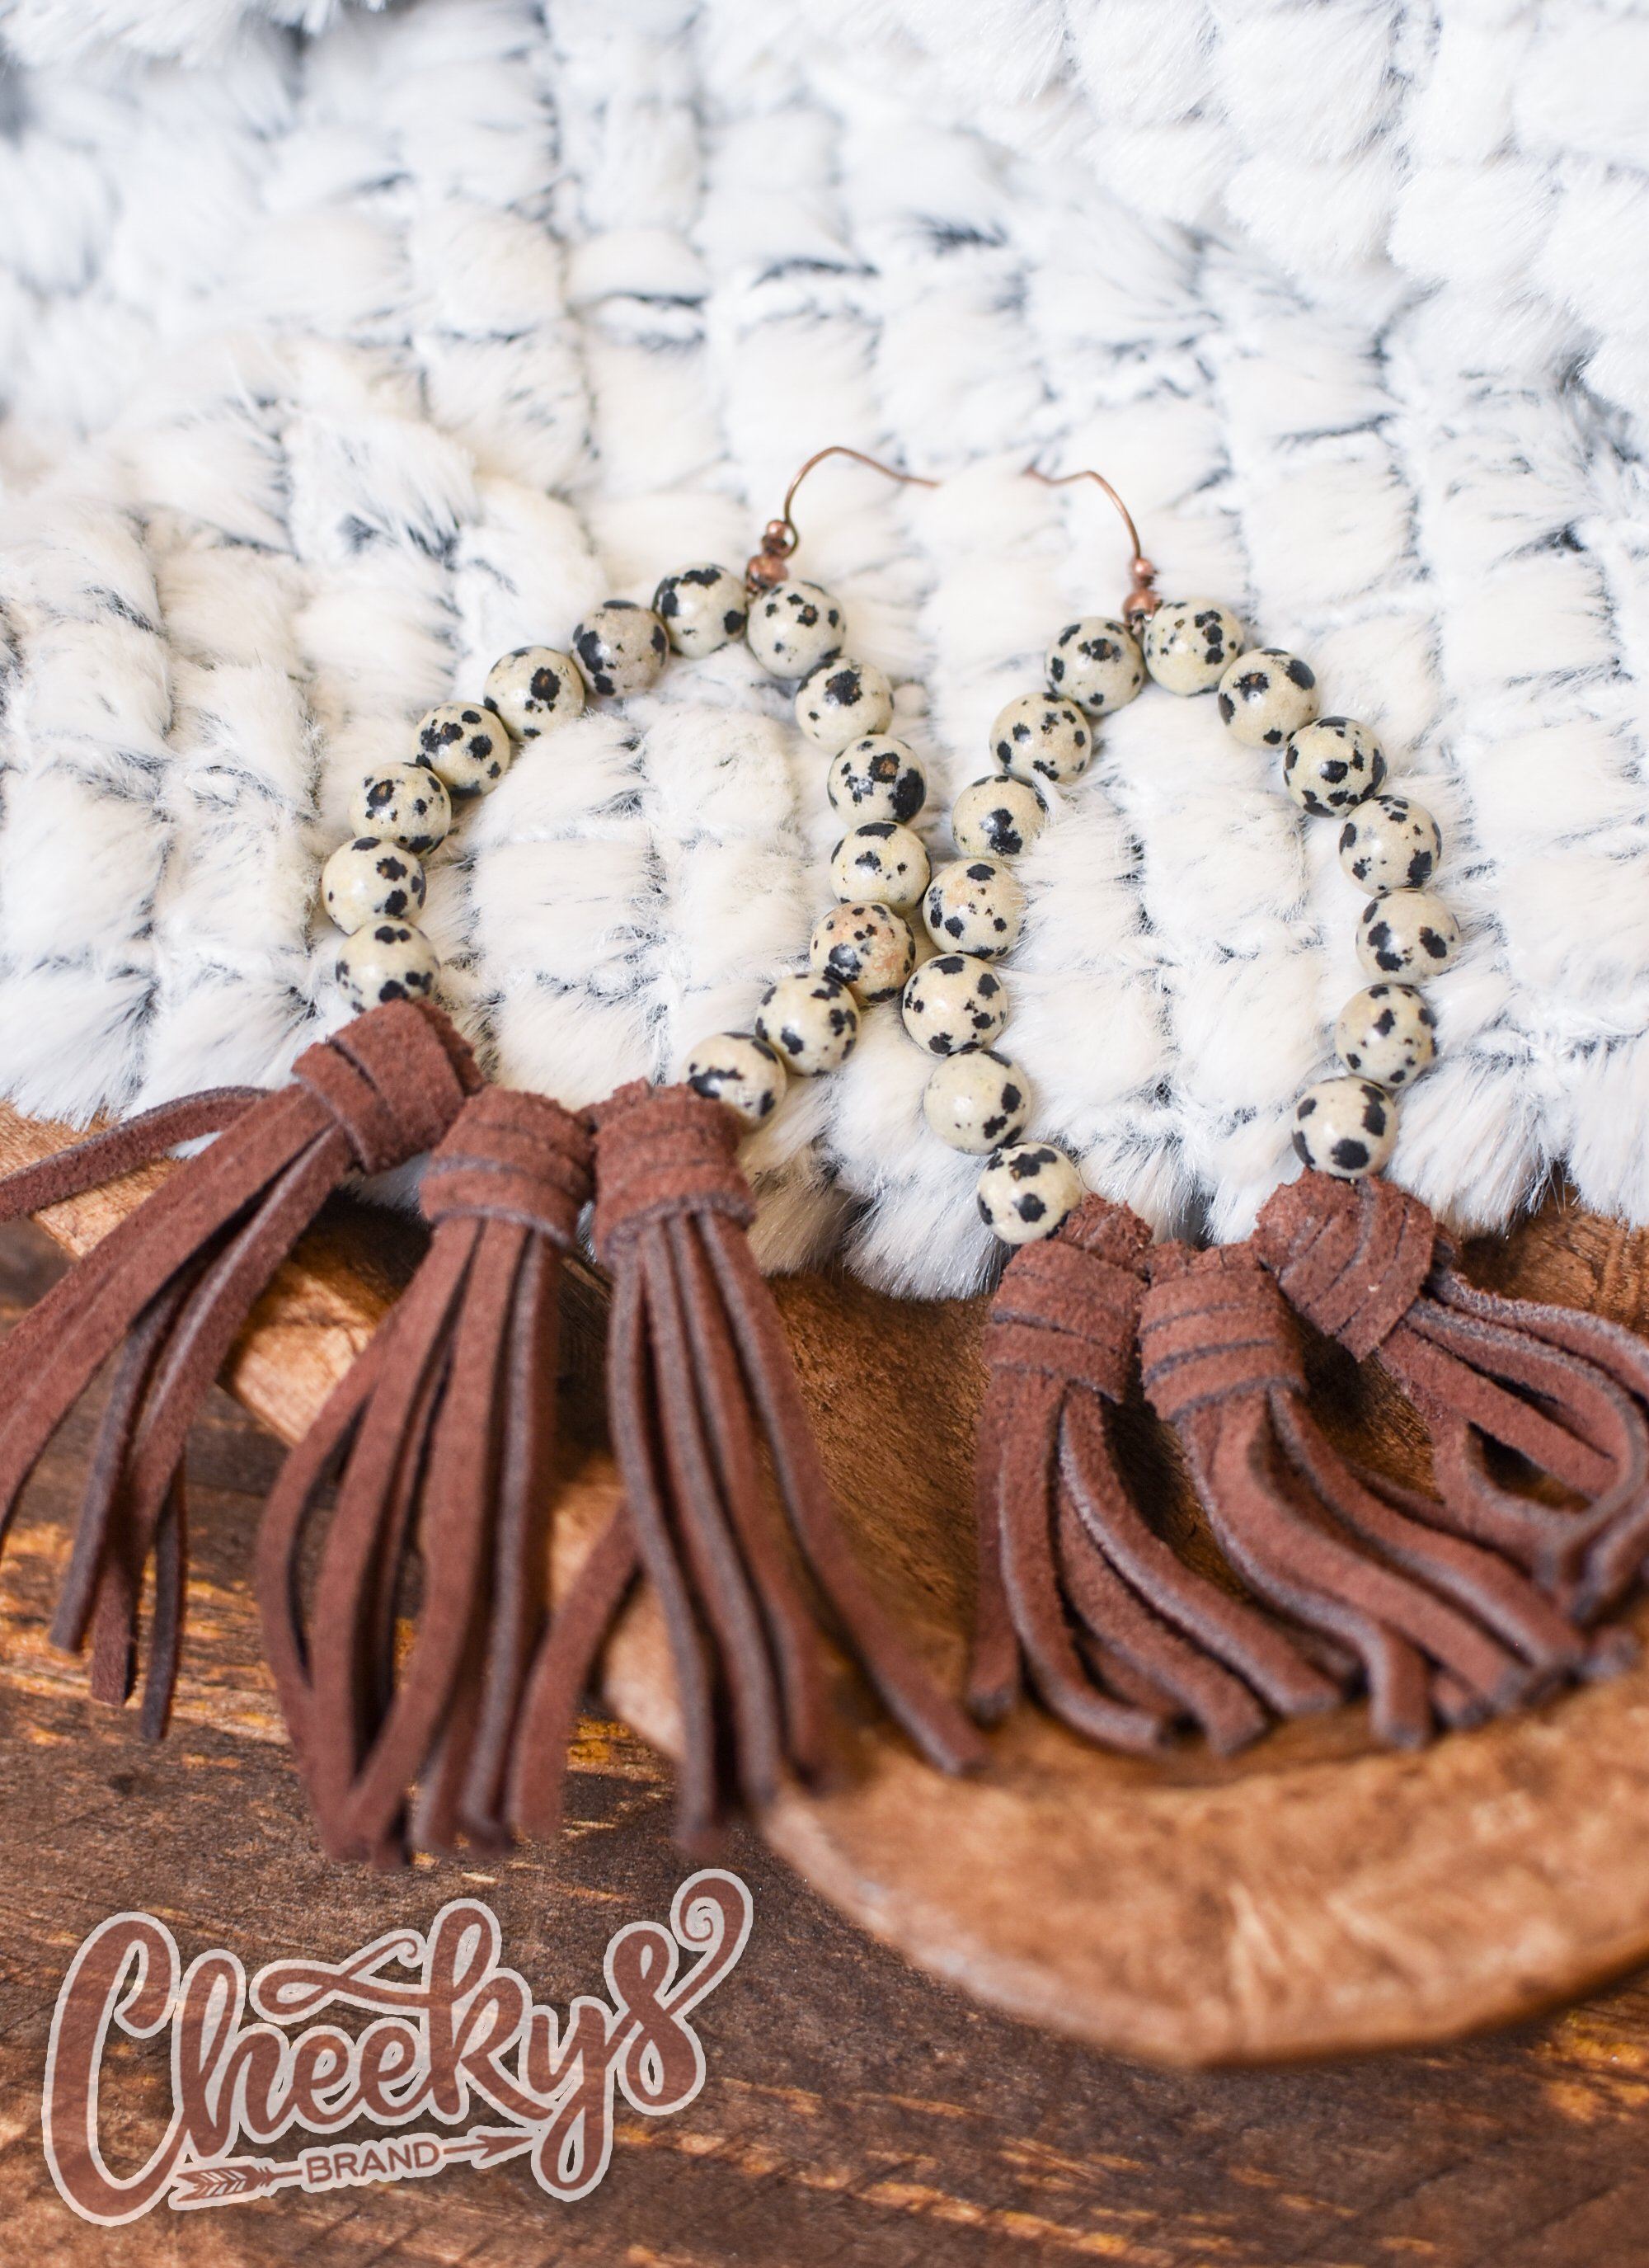 Willa Leather Tassel Earrings with Cow Print Beads and Brown Tassels Jewelry 18 